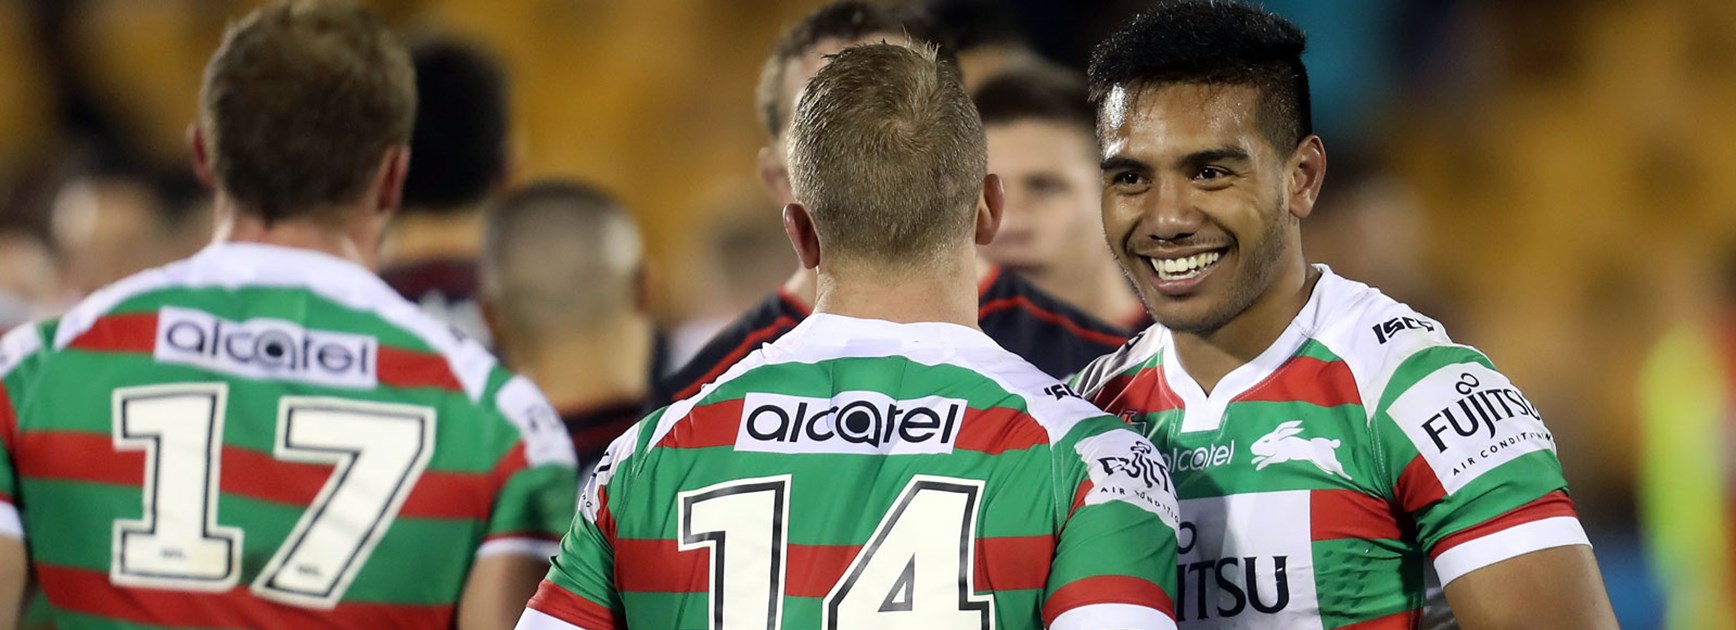 Rabbitohs players celebrate victory over the Warriors.